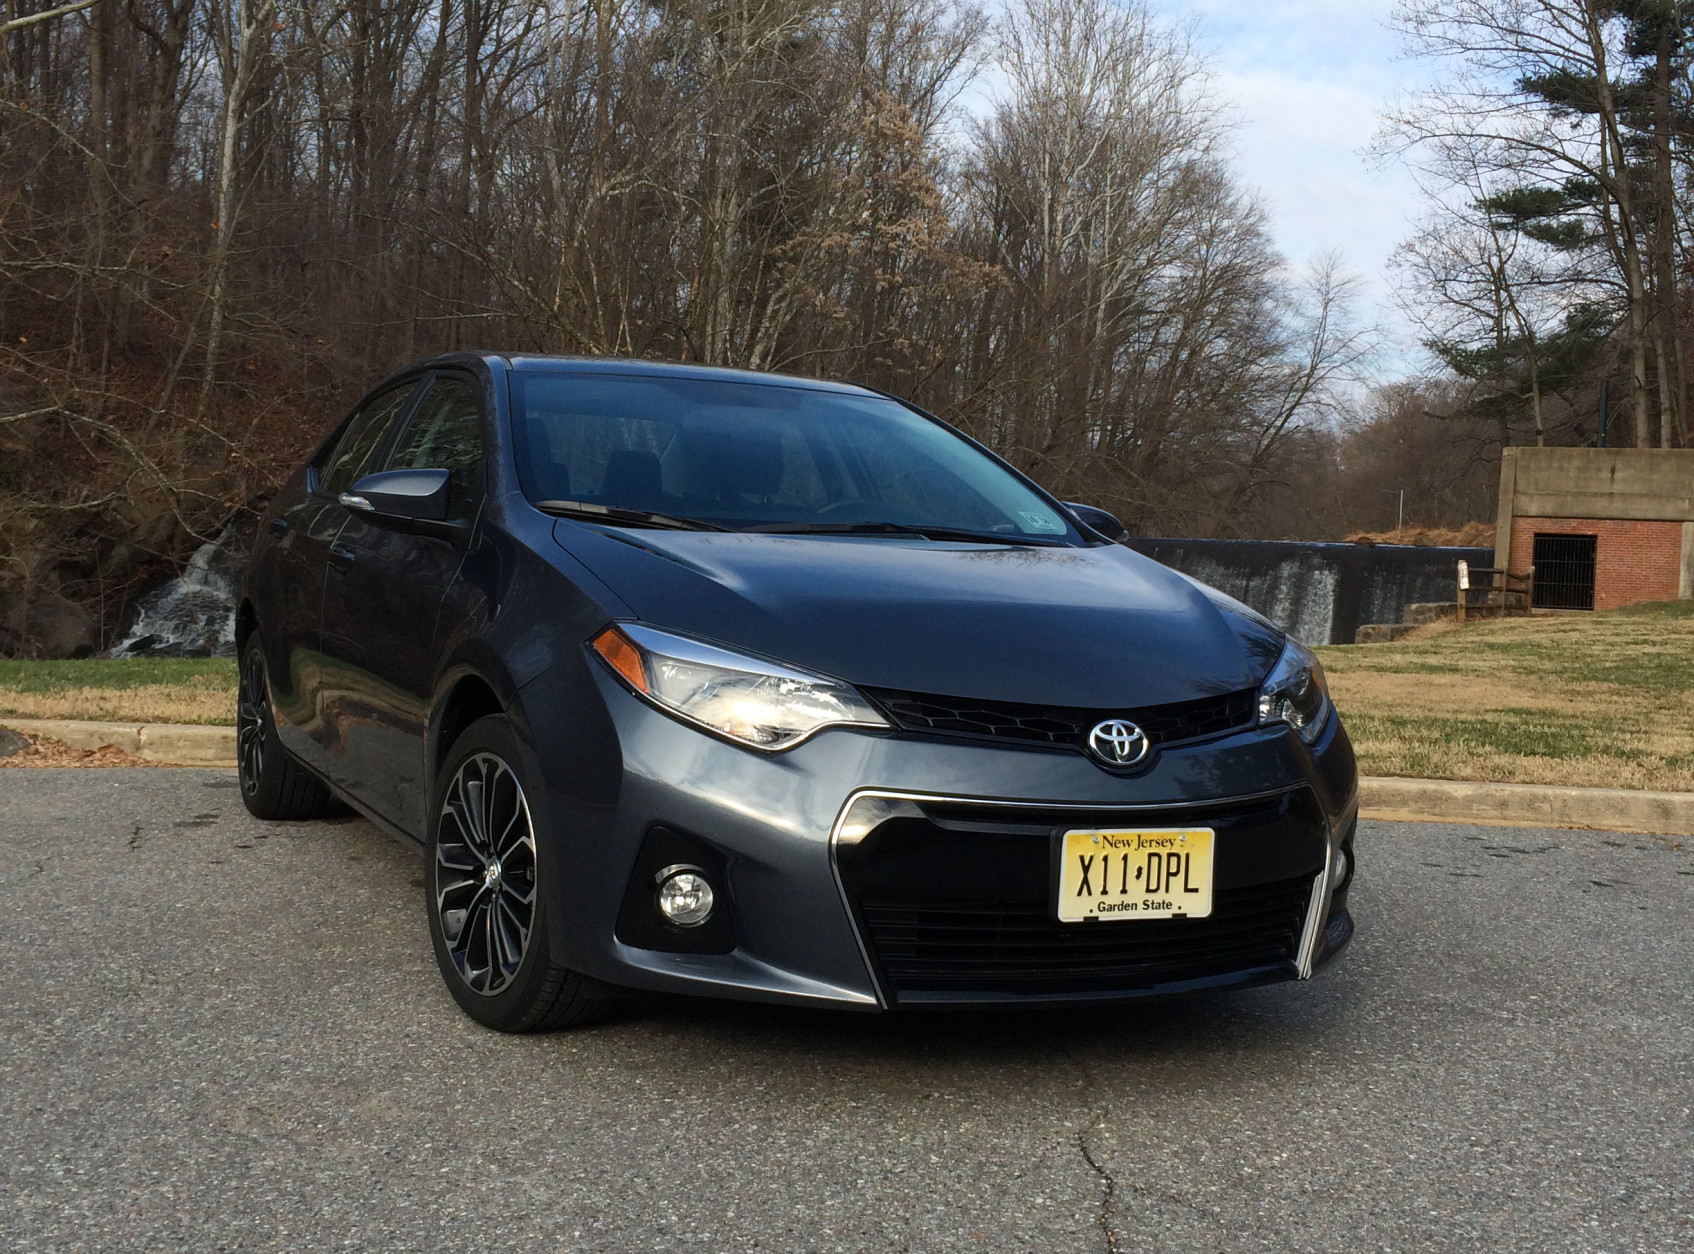 The front end is very stylish and looks sporty. (WTOP/Mike Parris)